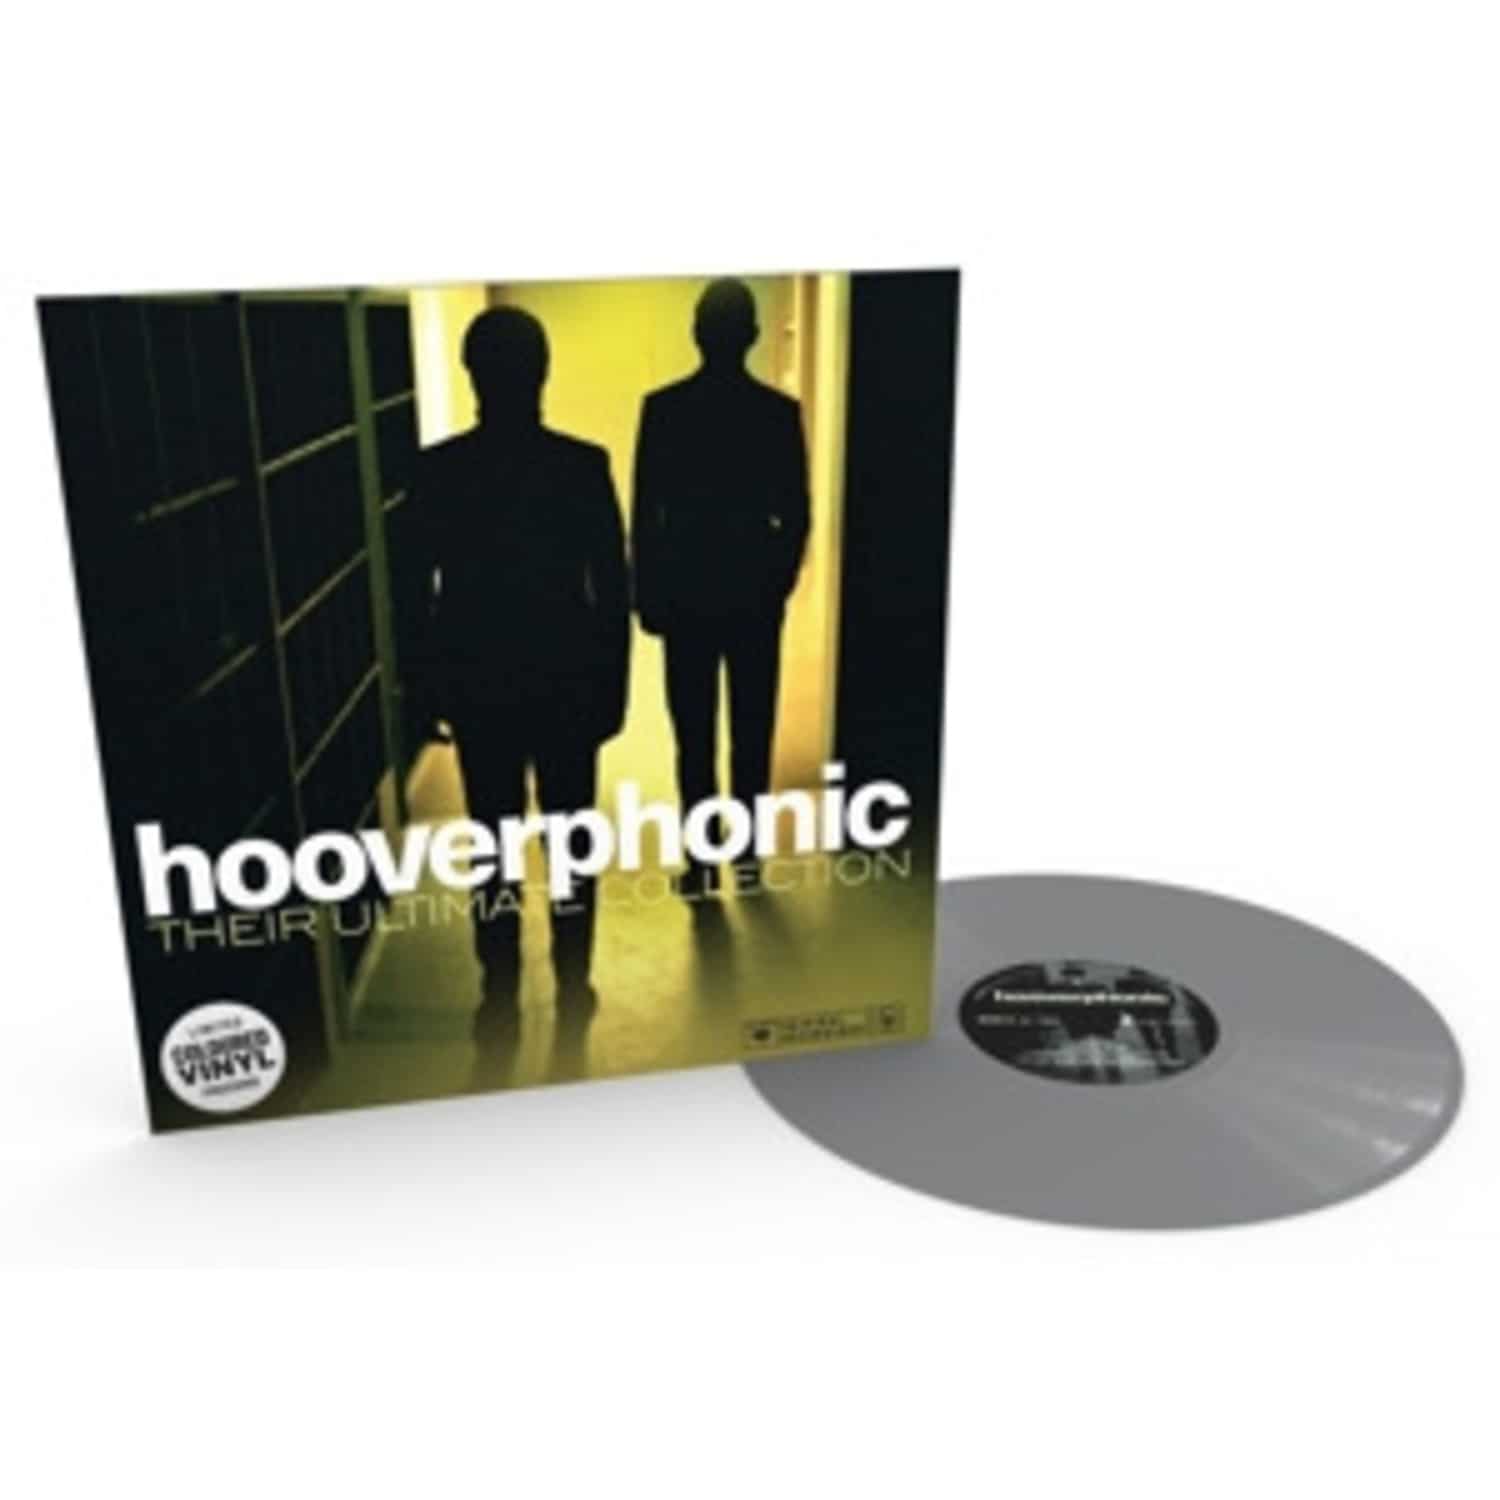 Hooverphonic - THEIR ULTIMATE COLLECTION 